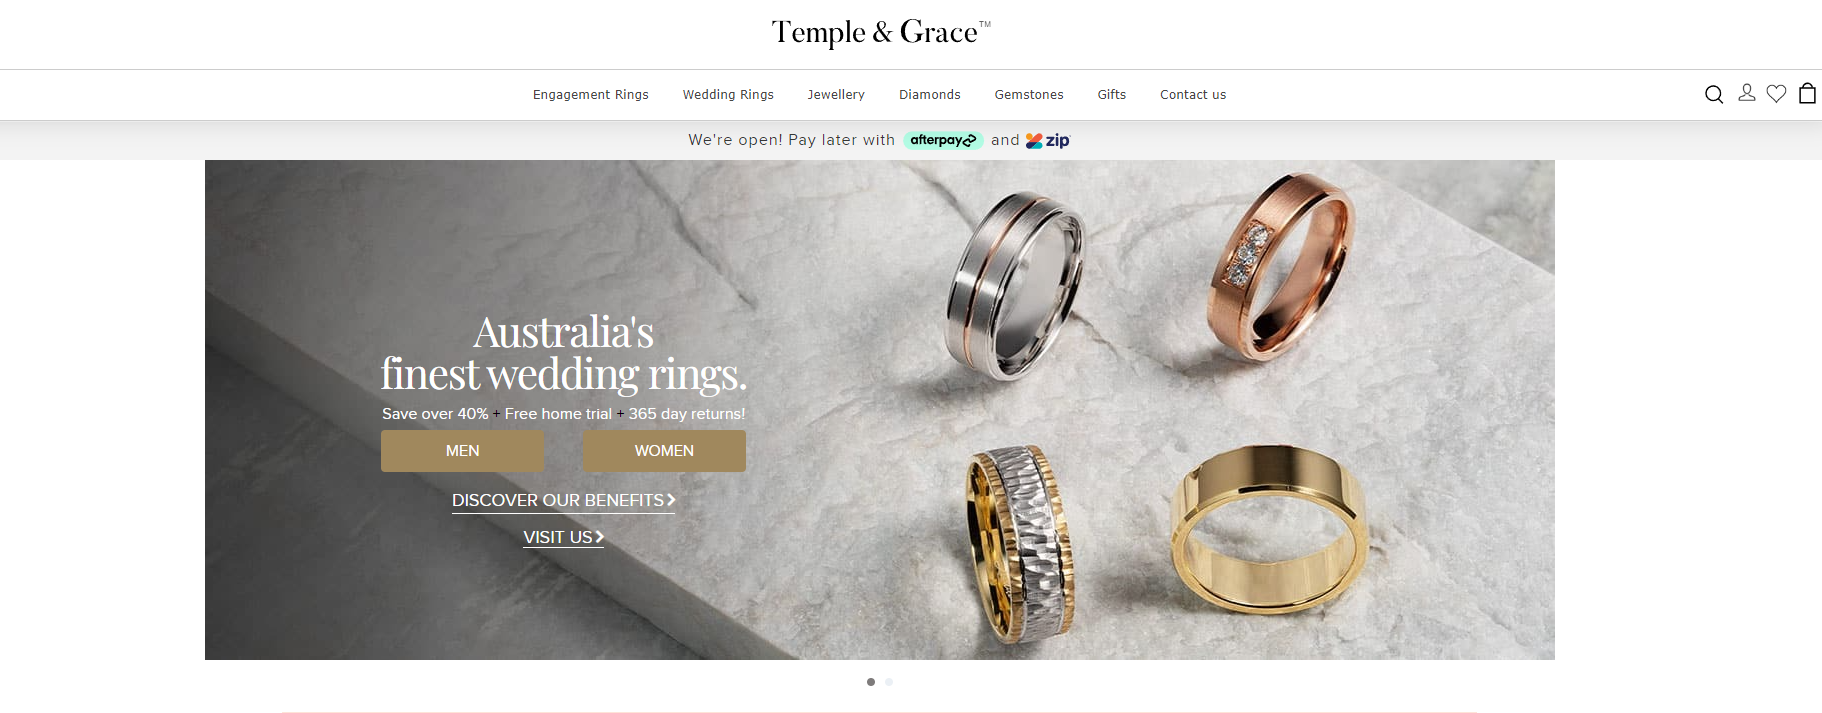 Website Design & eCommerce shops for jewellery retailers and luxury brands.  — Leading Shopify Website Design Agency for Luxury Brands | Lionsorbet